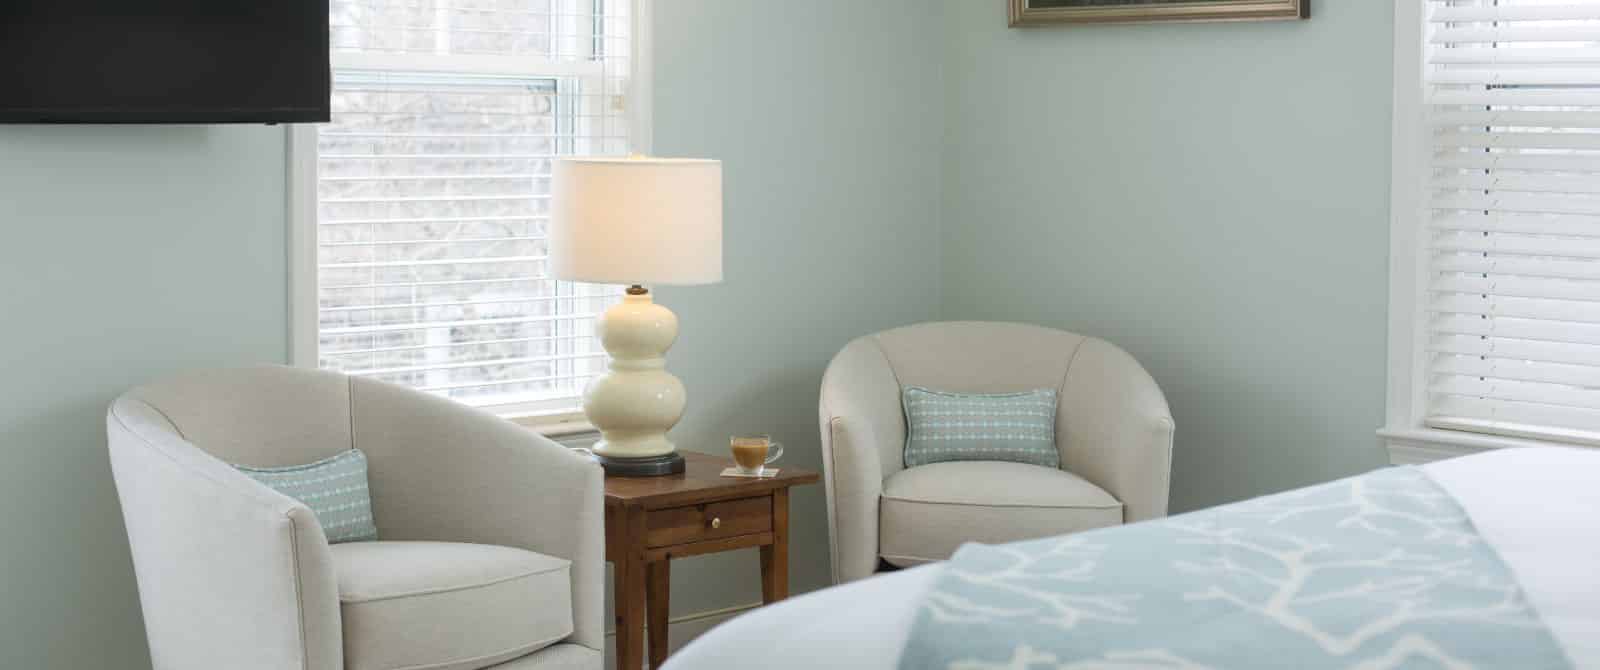 Bedroom with light green walls, white bedding, and sitting area with cream upholstered chairs